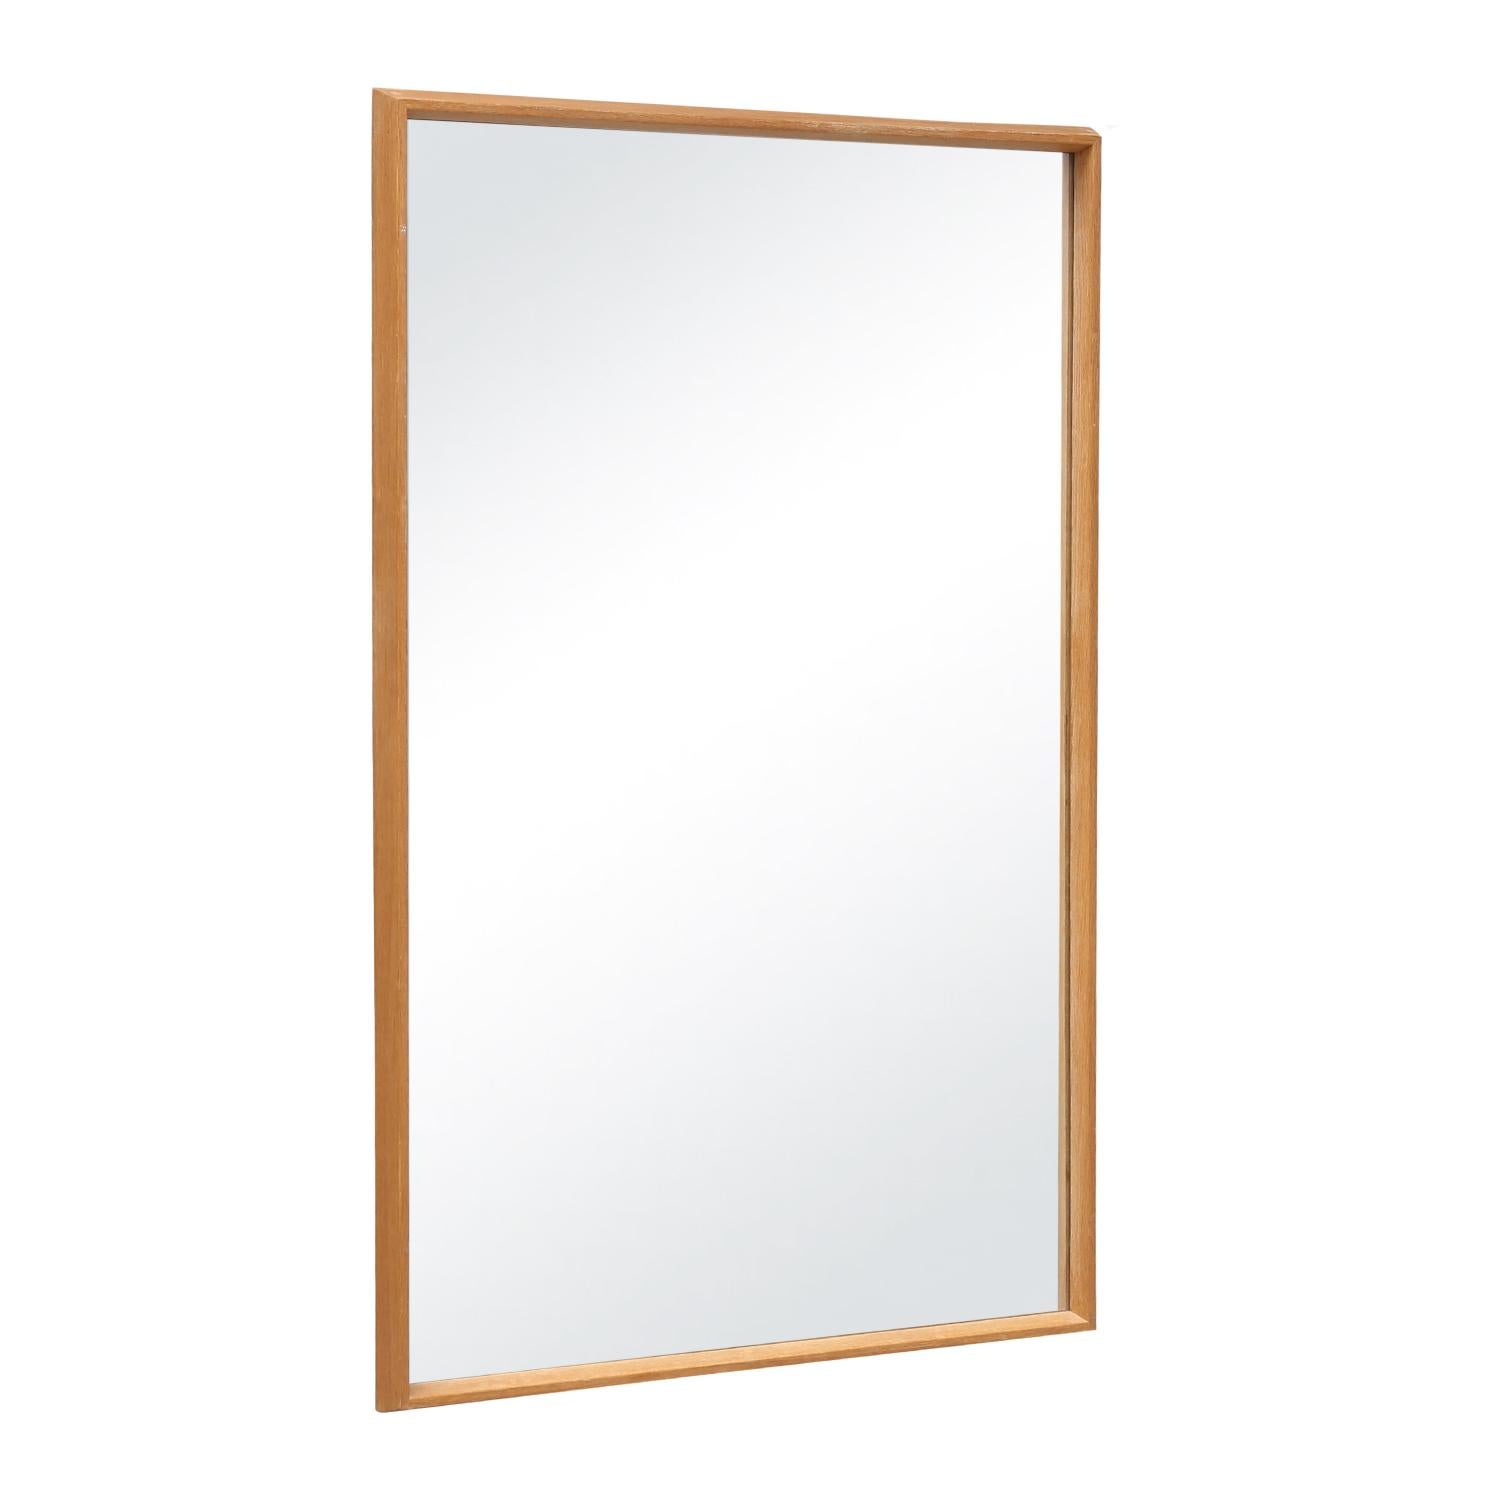 A rectangular, vintage Mid-Century Modern Danish wall mirror with its original mirrored glass, made of hand crafted Oakwood in good condition. Wear consistent with age and use, circa 1950 - 1970, Denmark, Scandinavia.